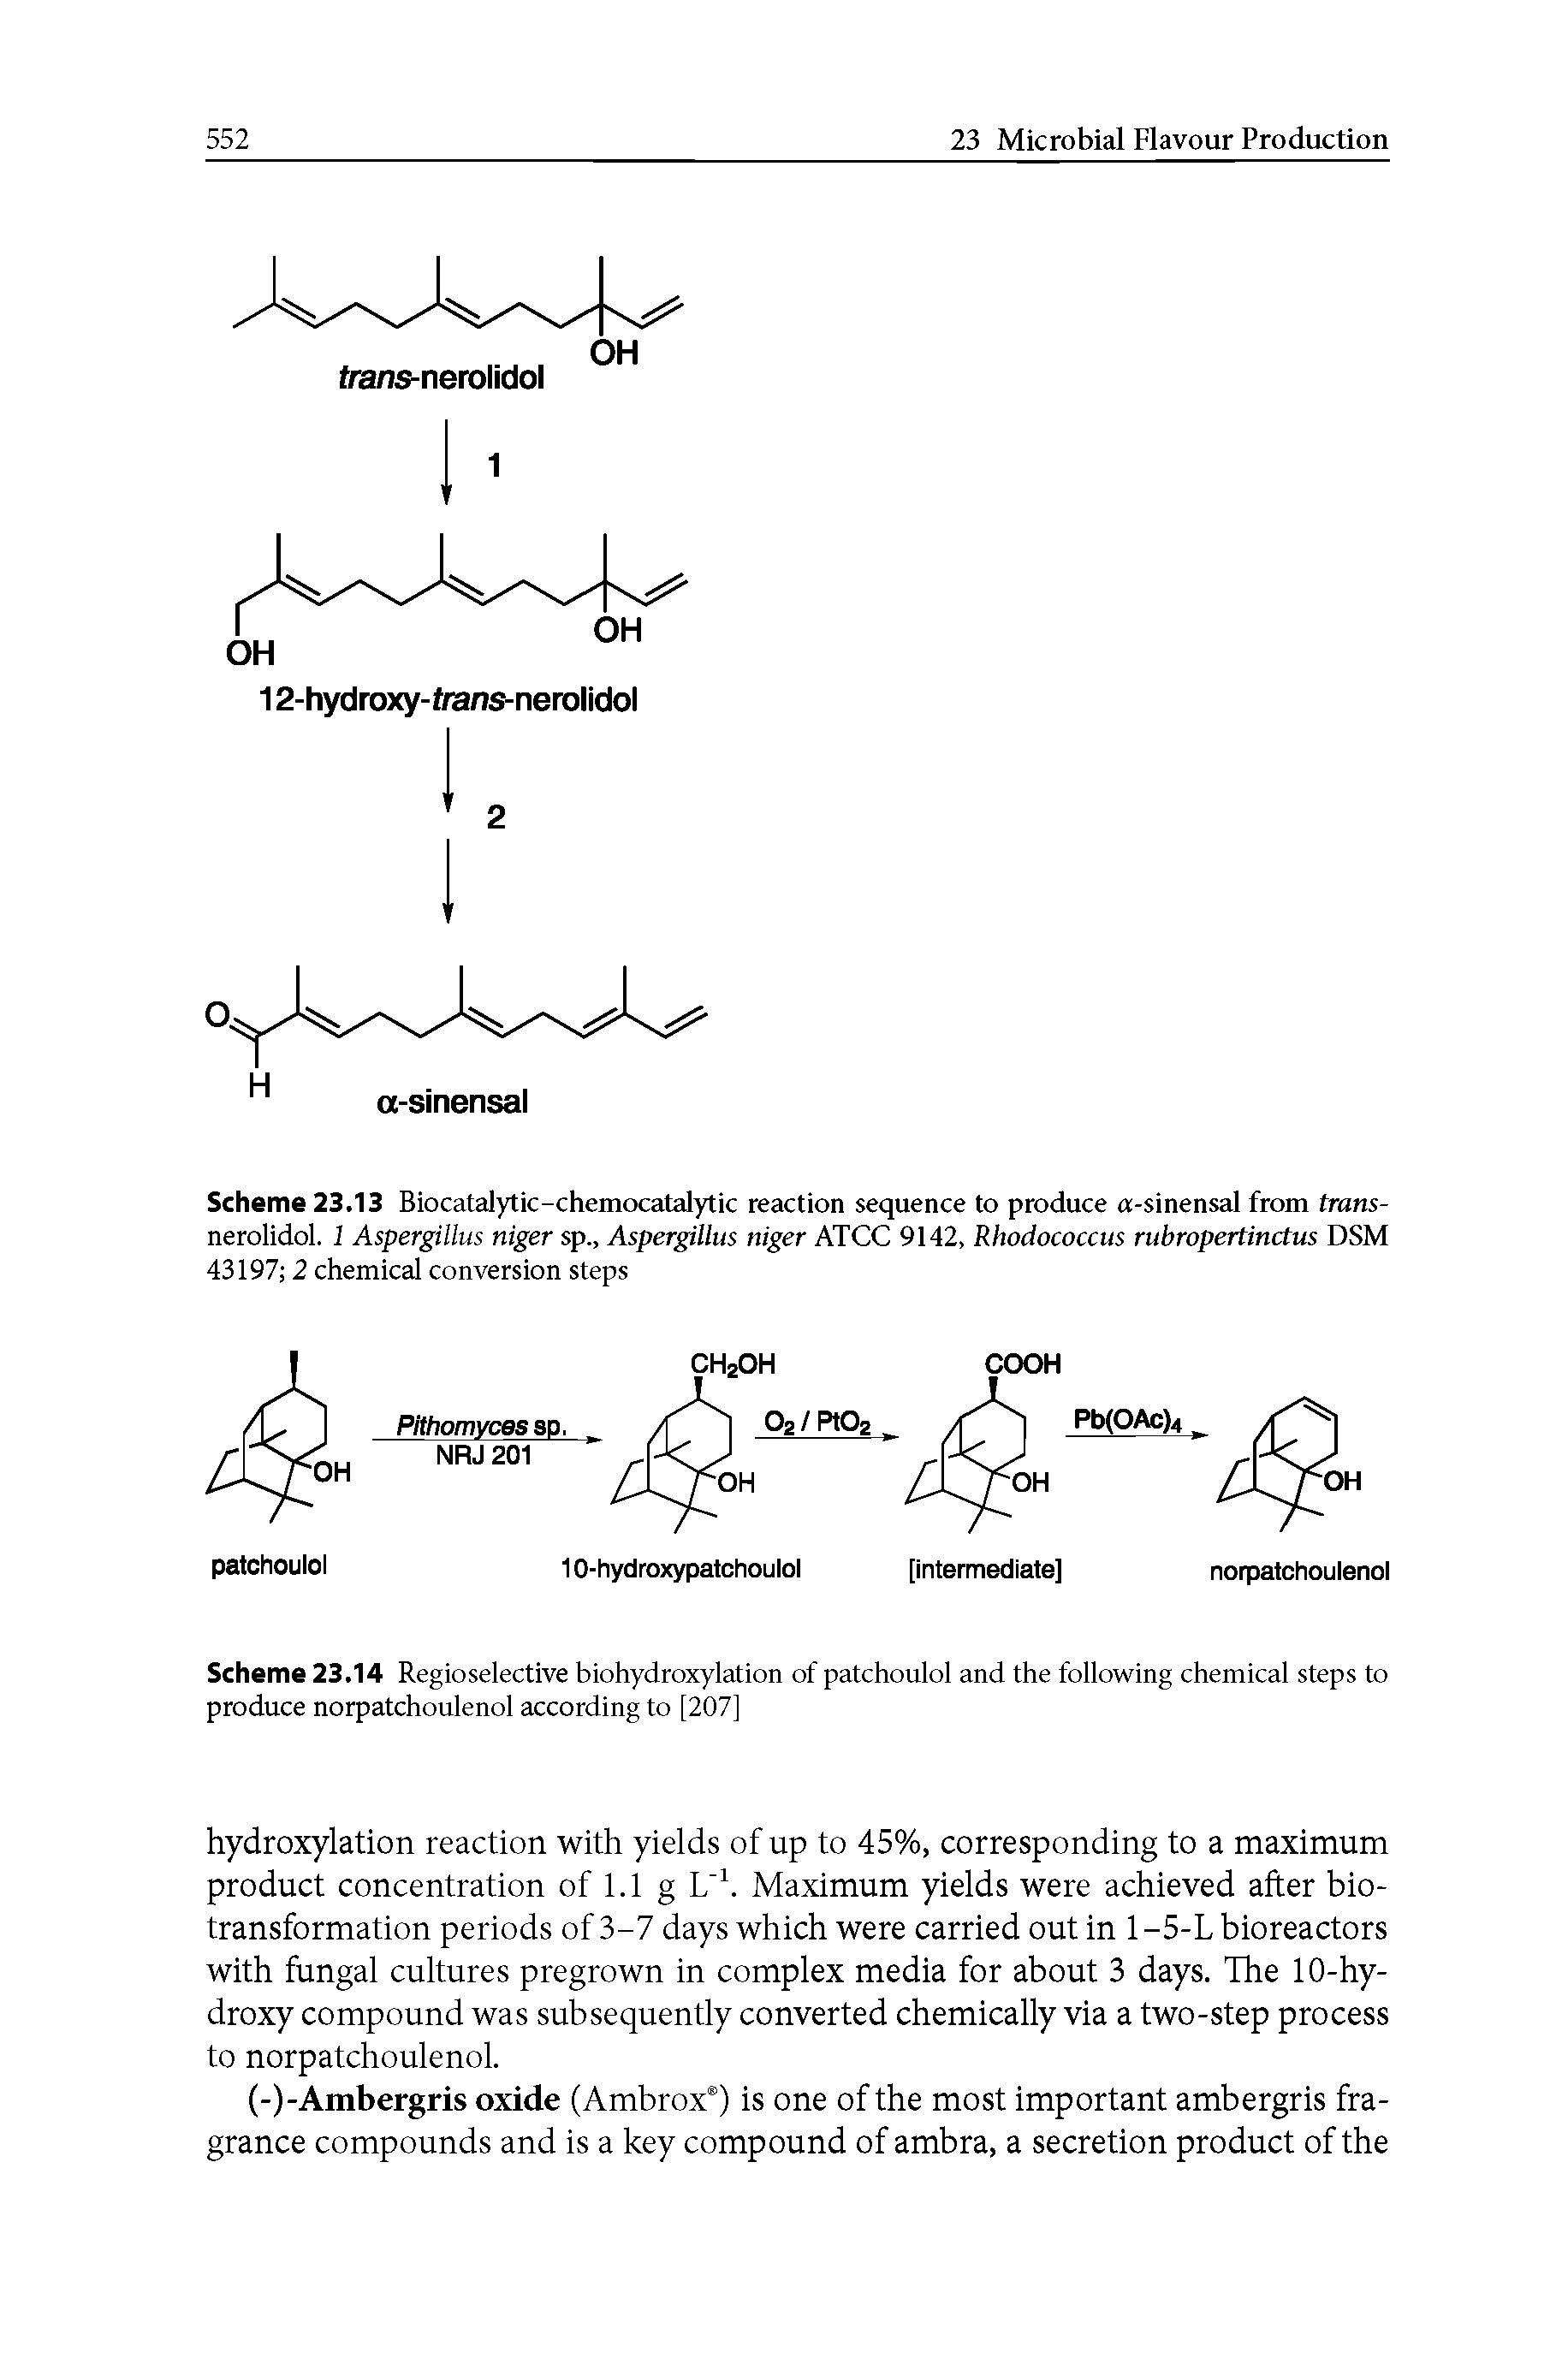 Scheme 23.14 Regioselective biohydroxylation of patchoulol and the following chemical steps to produce norpatchoulenol according to [207]...